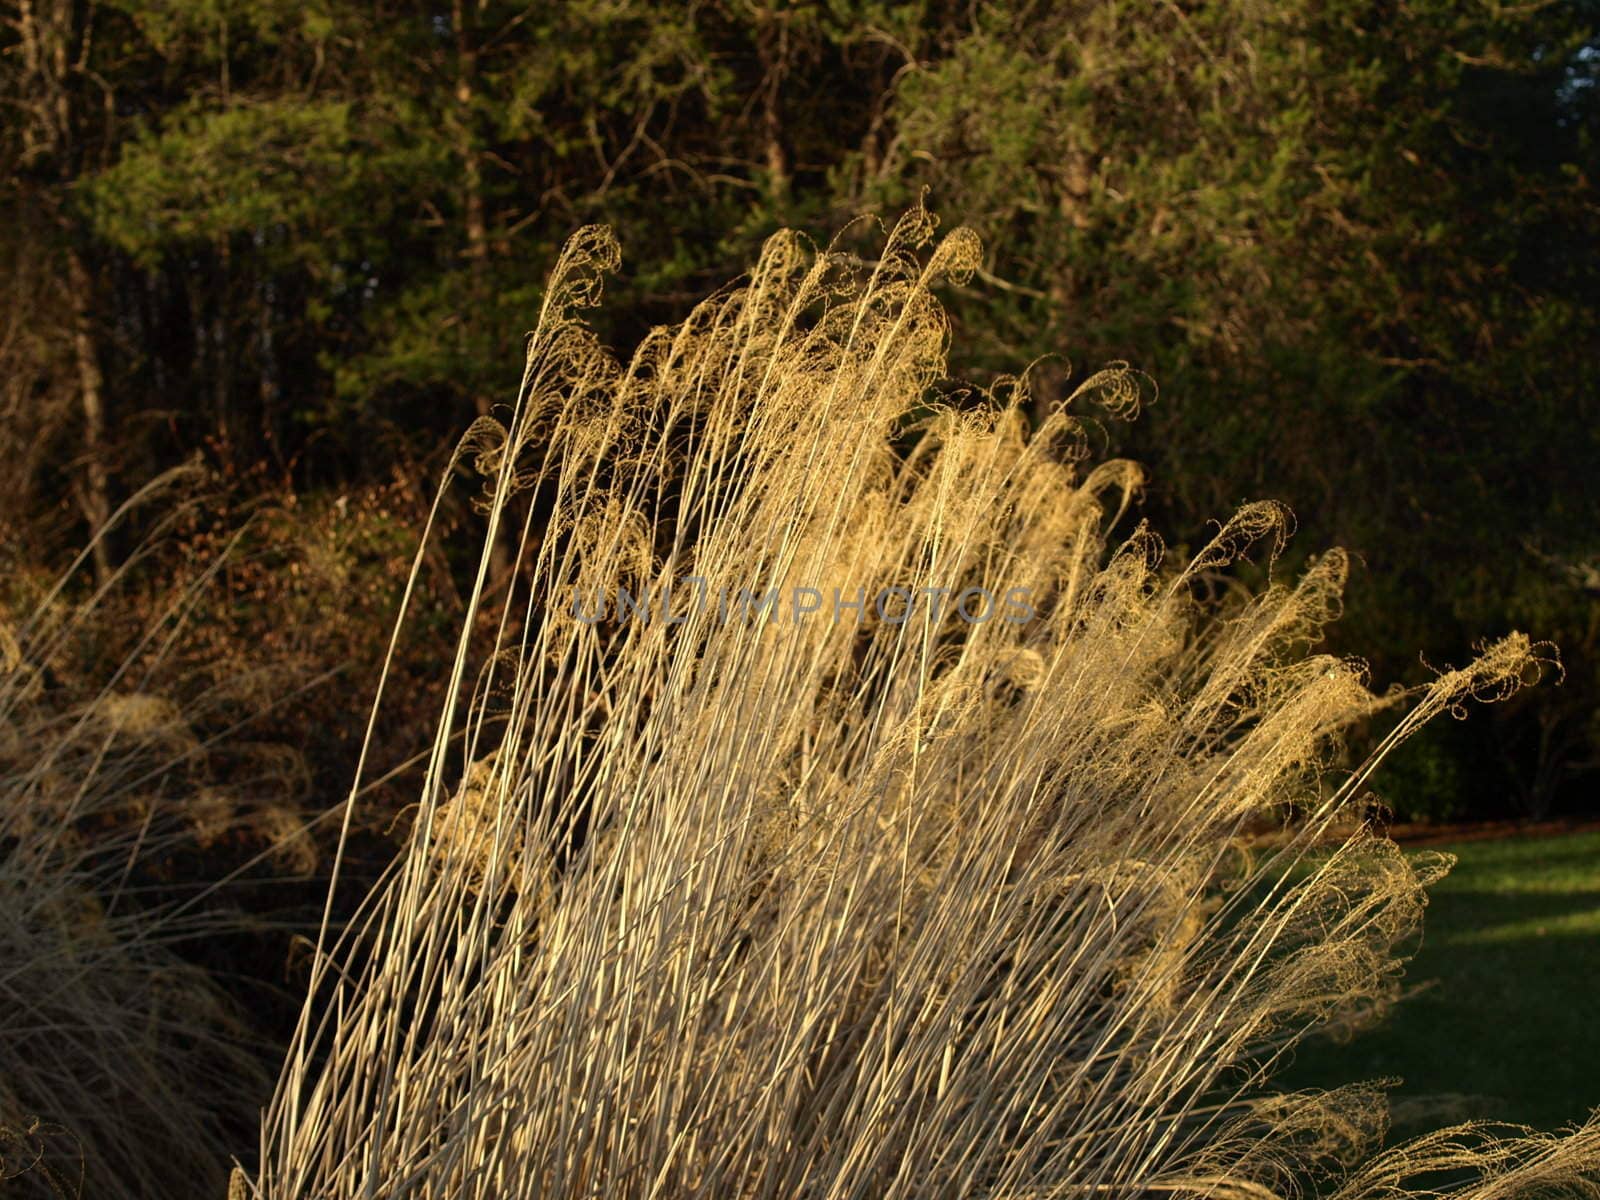 Tall ornamental grass in the summer time